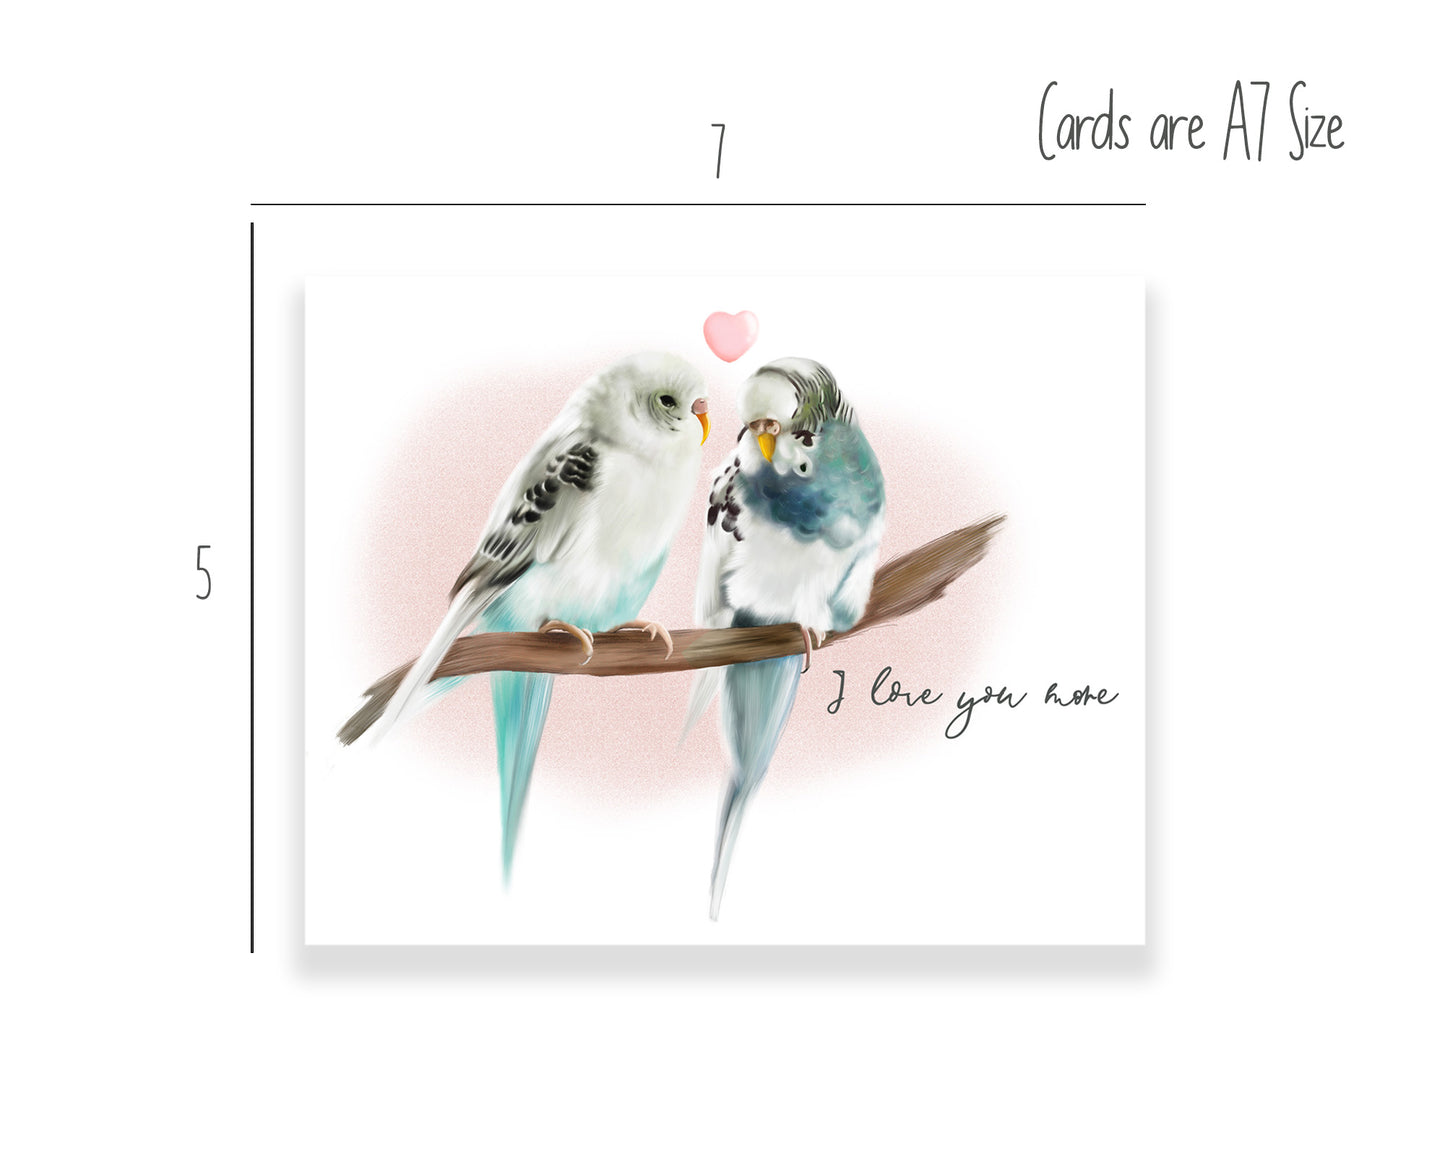 Two parakeets on a branch with a pink background and pink love heart art print greeting card - Studio Q - Art by Nicky Quartermaine Scott